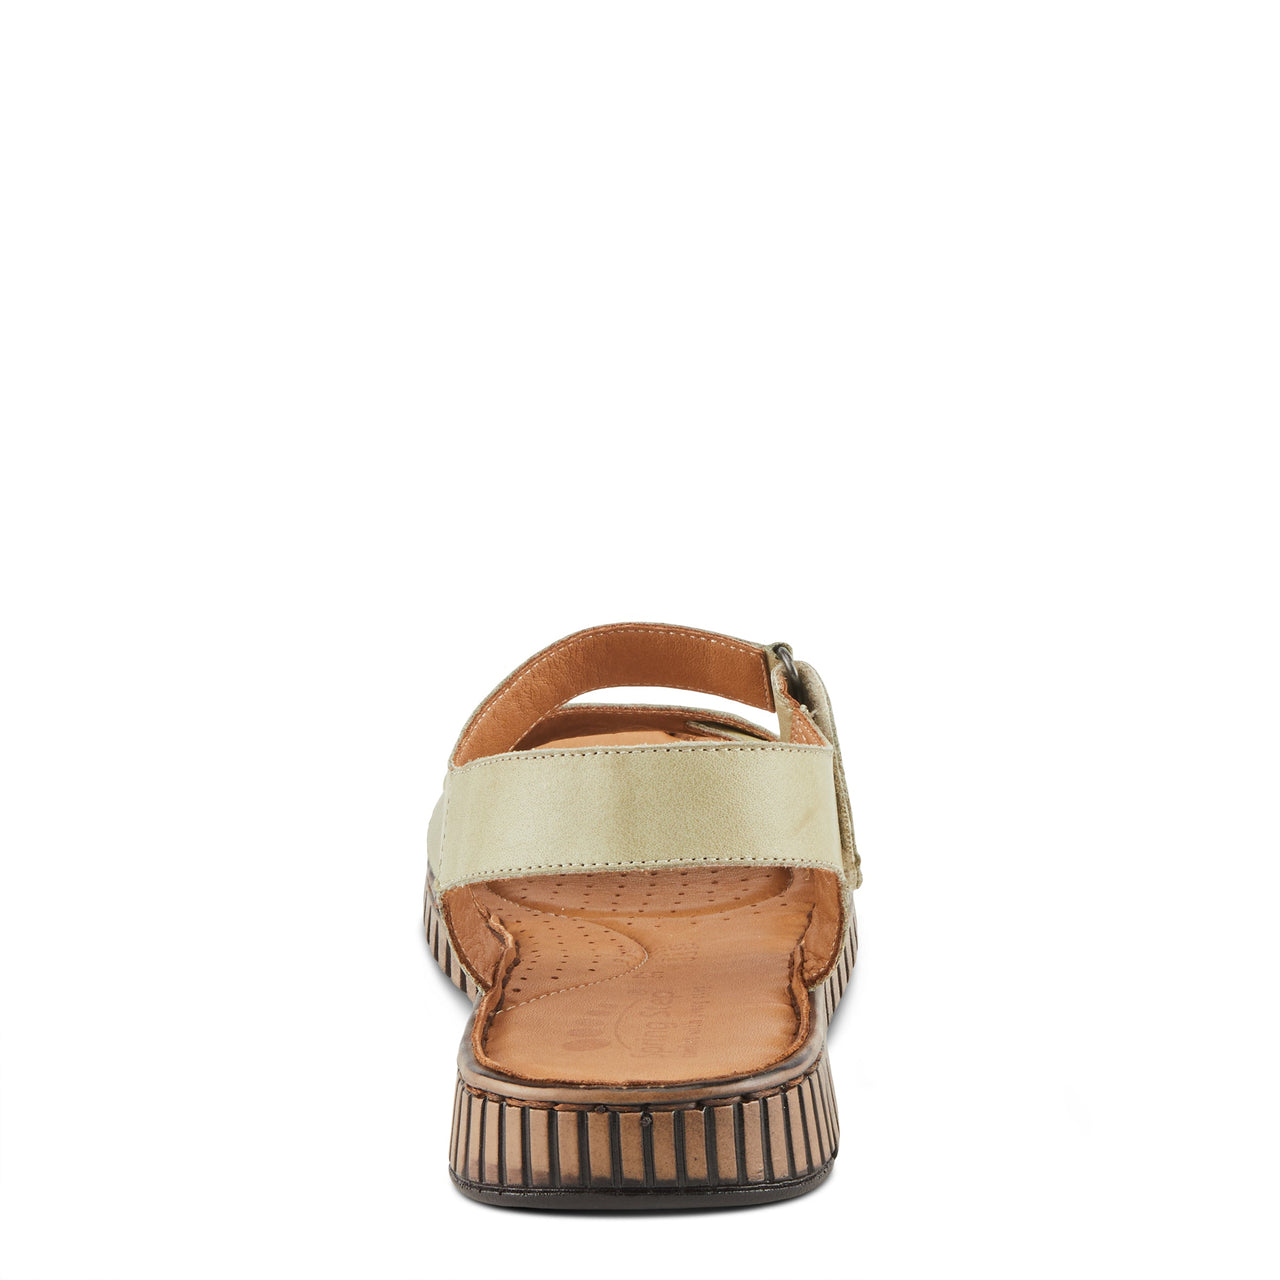 Comfortable and stylish Spring Step Nochella Sandals in brown leather